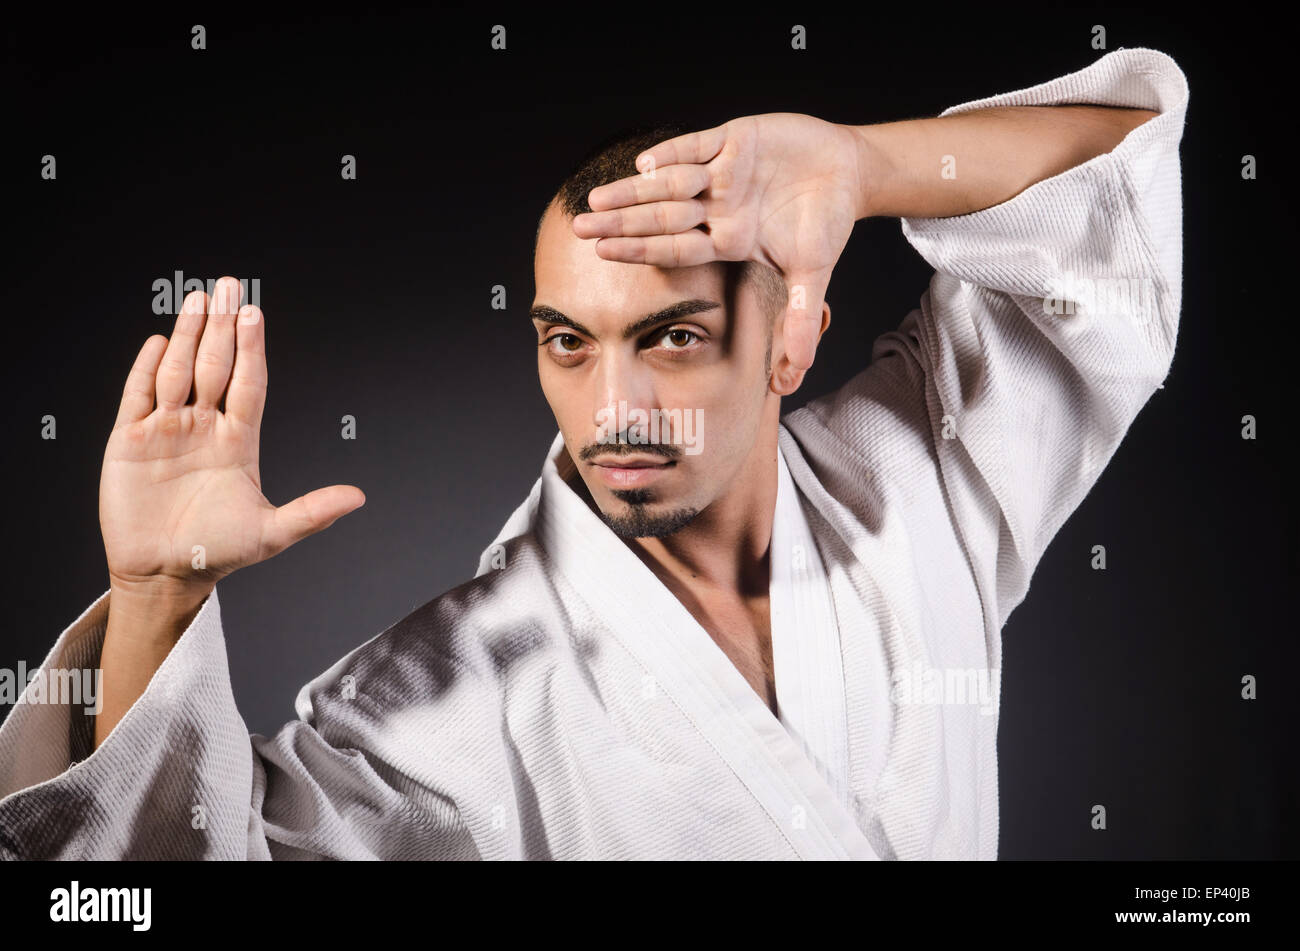 Karate martial arts fighter Stock Photo